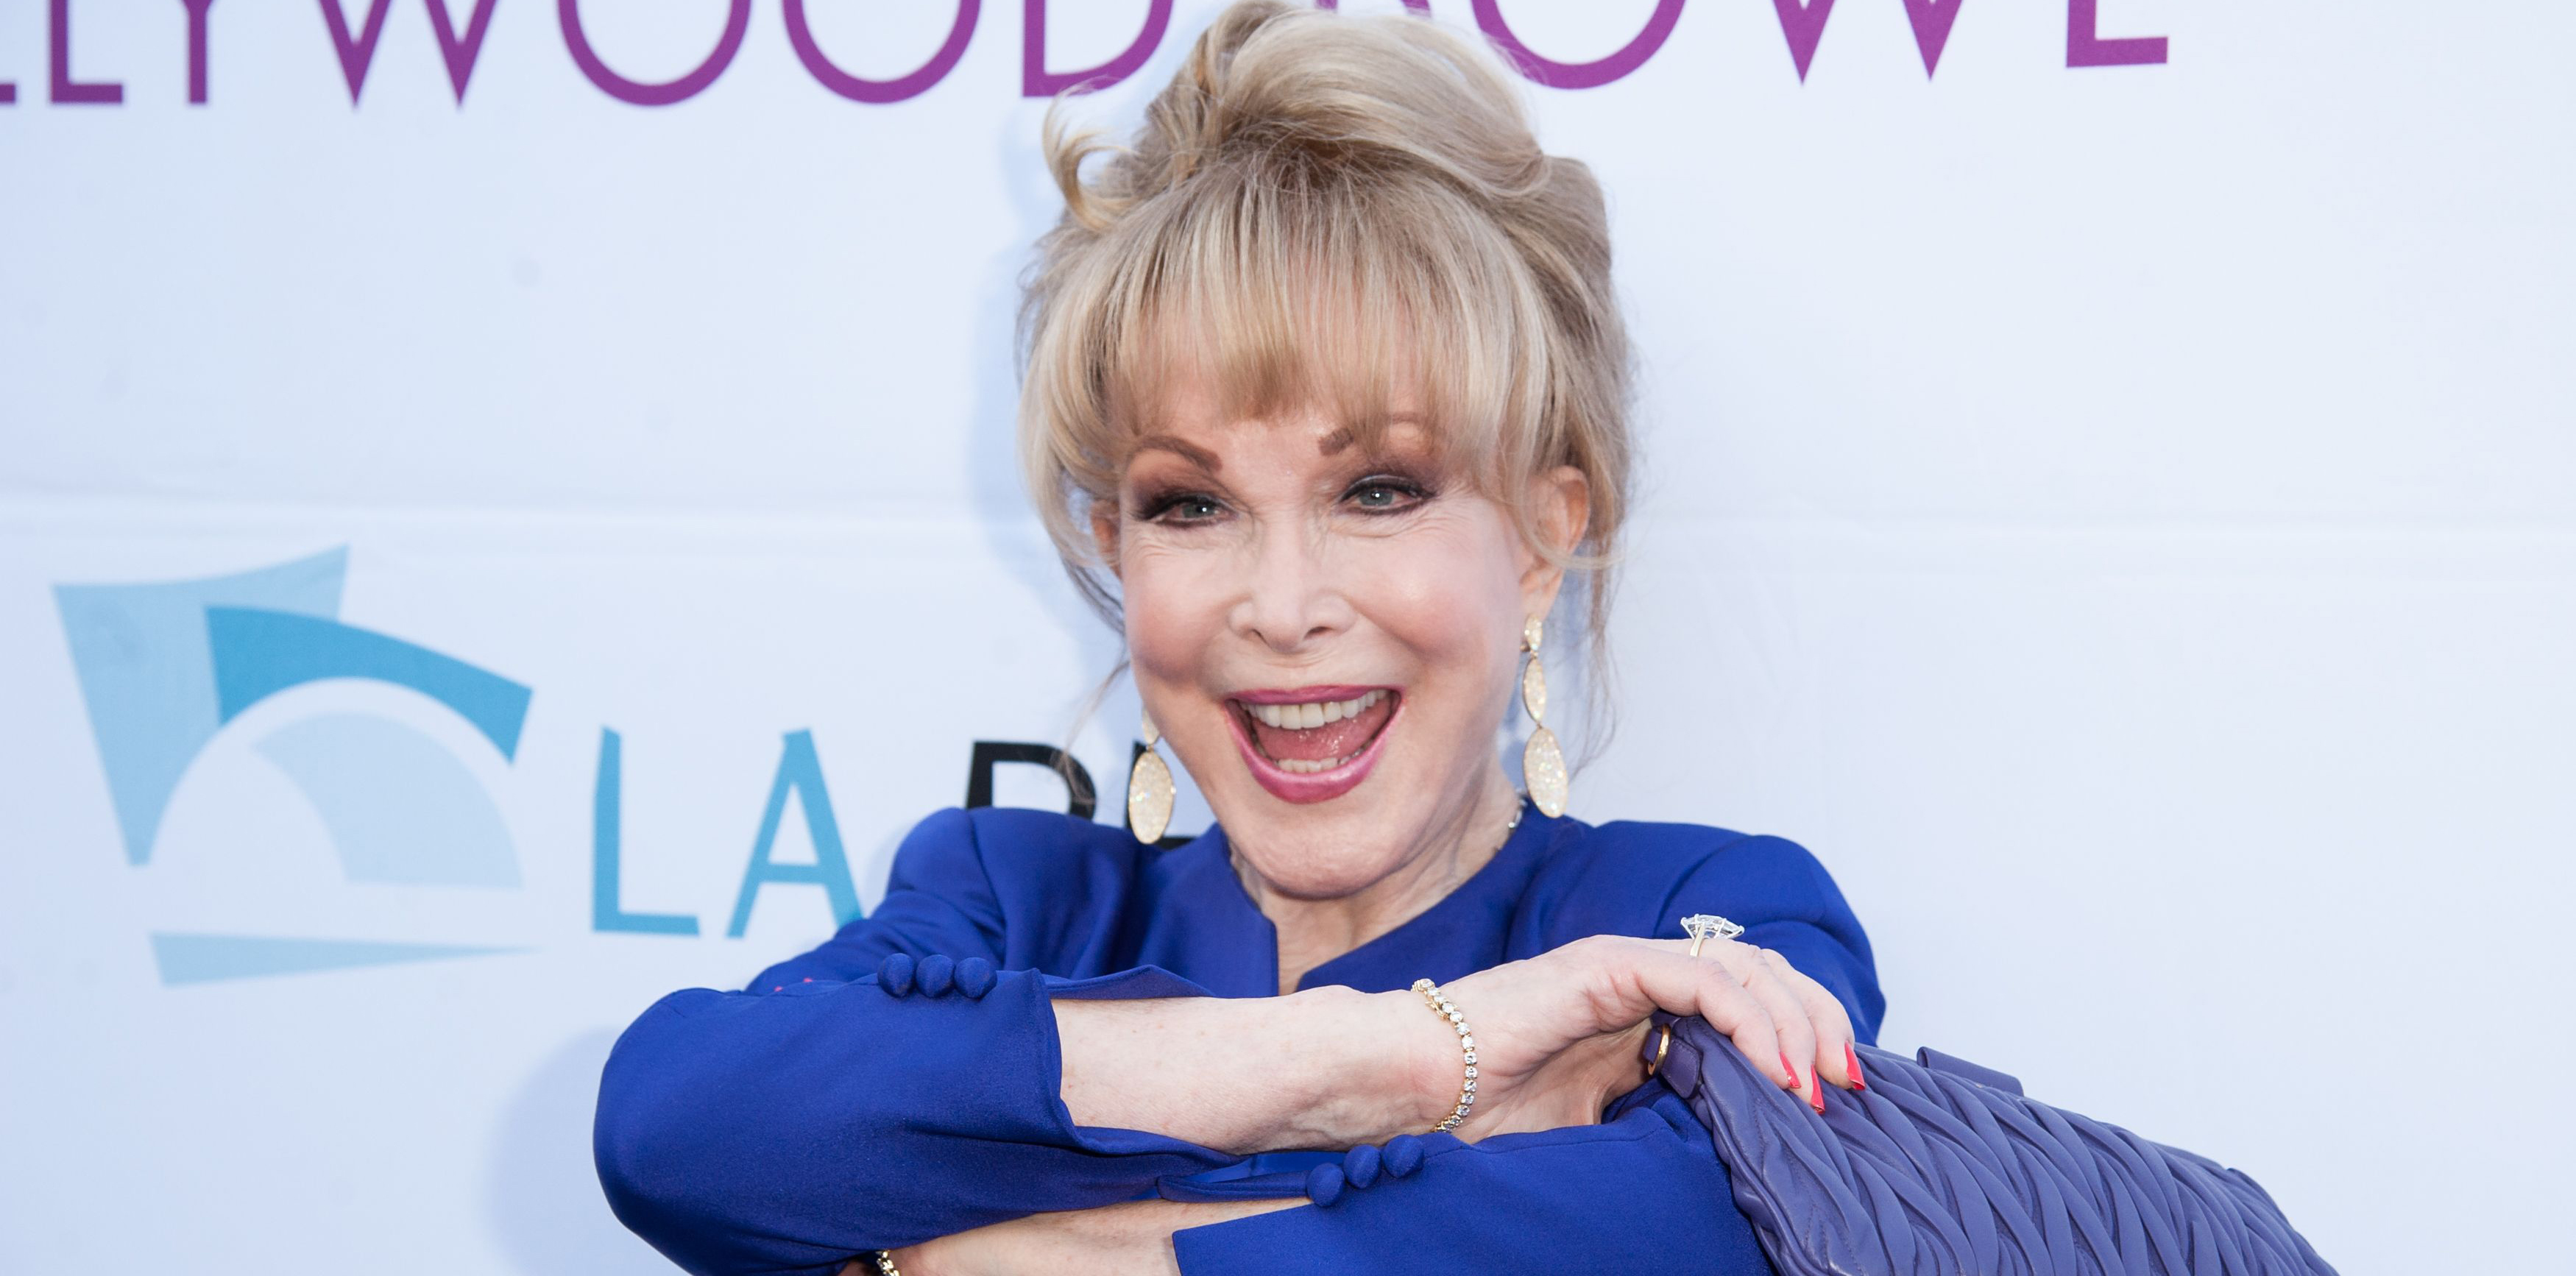 Kelly Andrews Fuck Porn - I Dream of Jeannie' Star Barbara Eden: A Look Back at Her Life